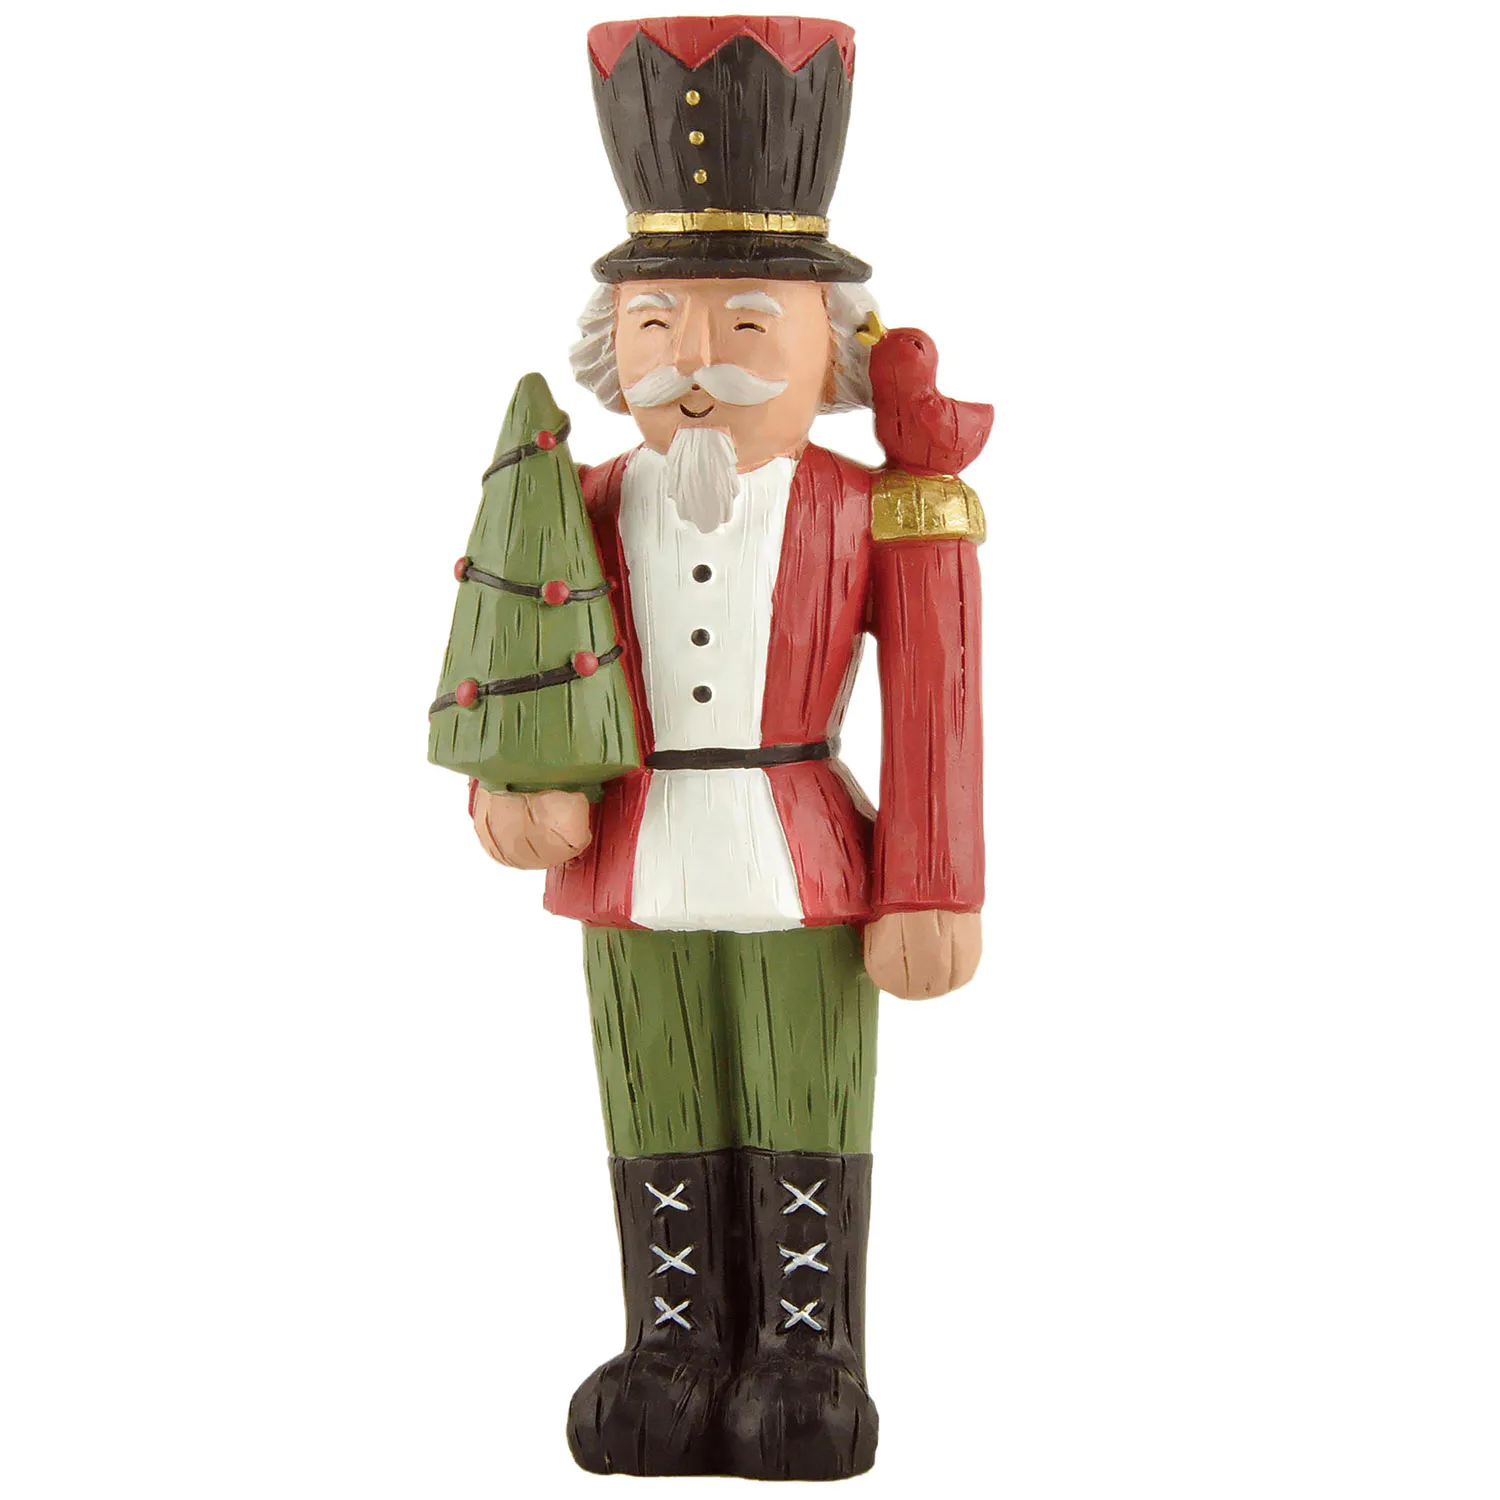 New Arrivals Resin Christmas Figurines Nutcracker Figurine w Black Hat & Tree Statues for Home Decor 238-13781